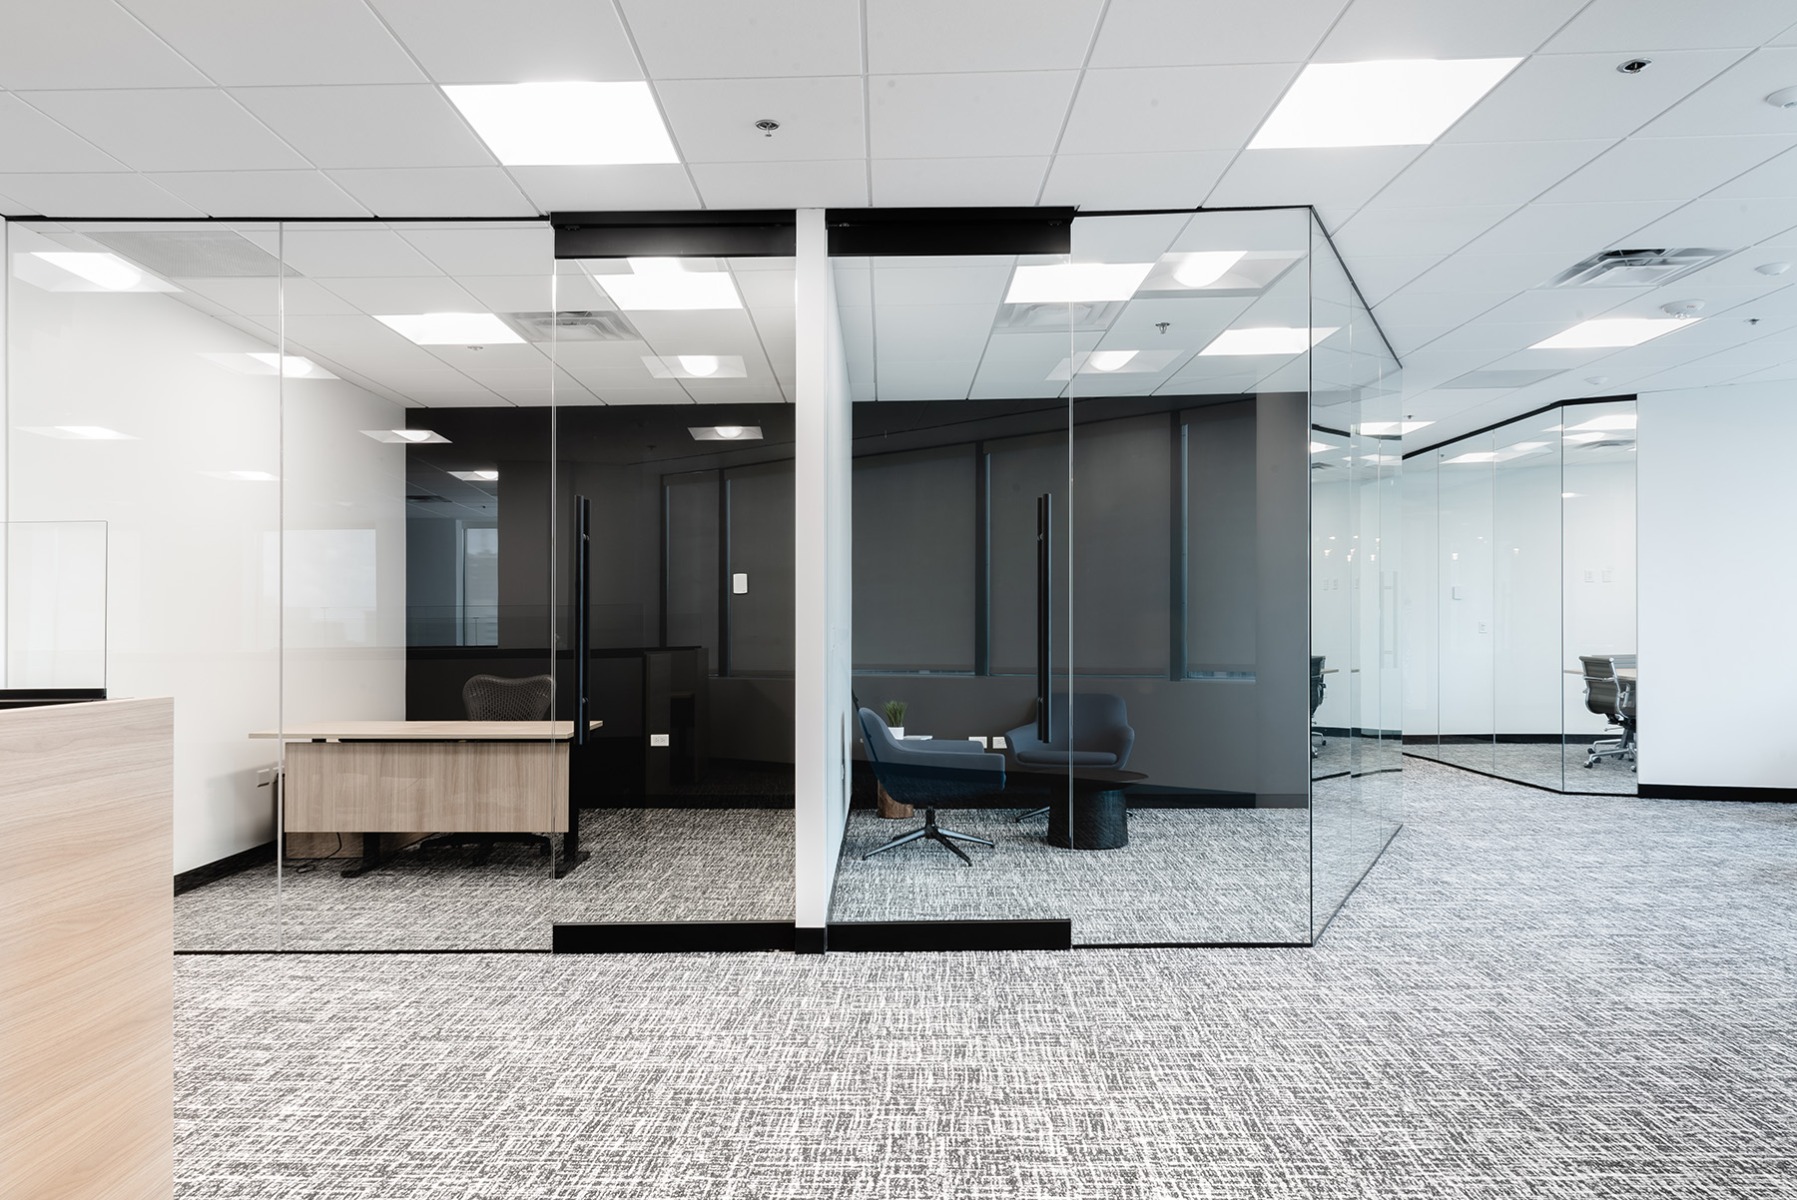 Panel lighting in the grid ceiling of the private offices at Tabor Center provide cool white light that’s beneficial for task focus while working.